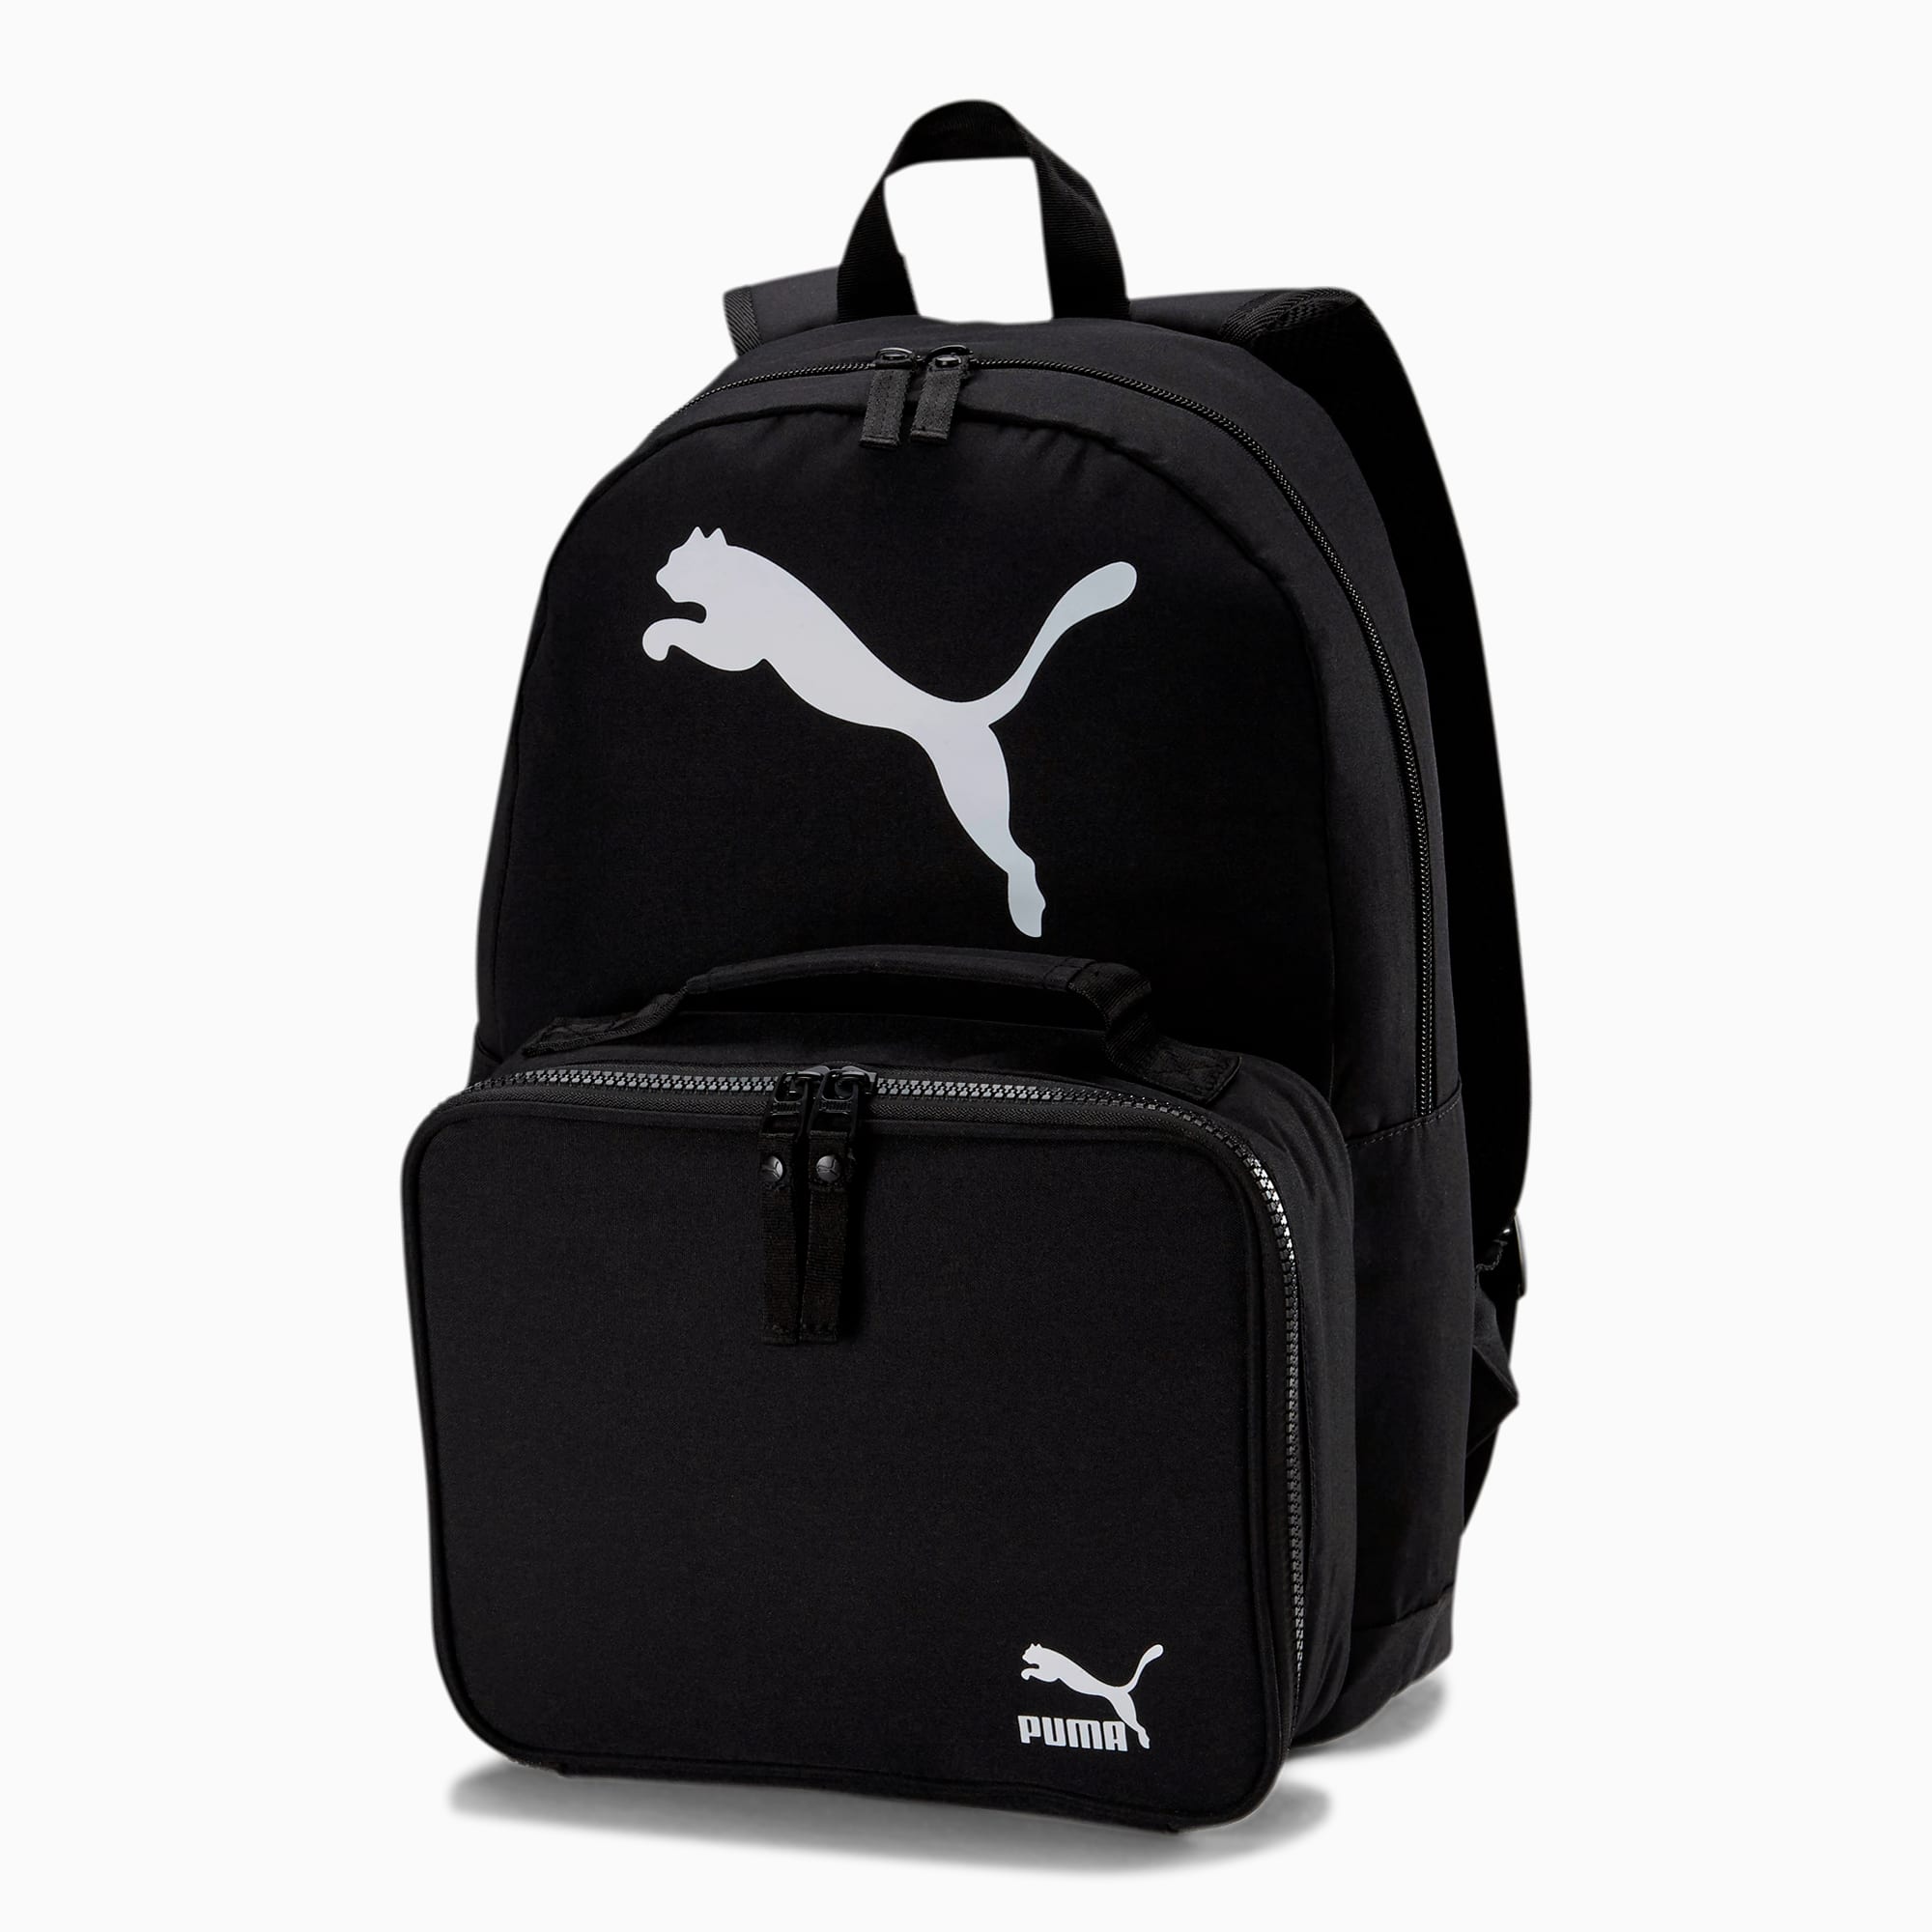 puma backpack with lunch bag